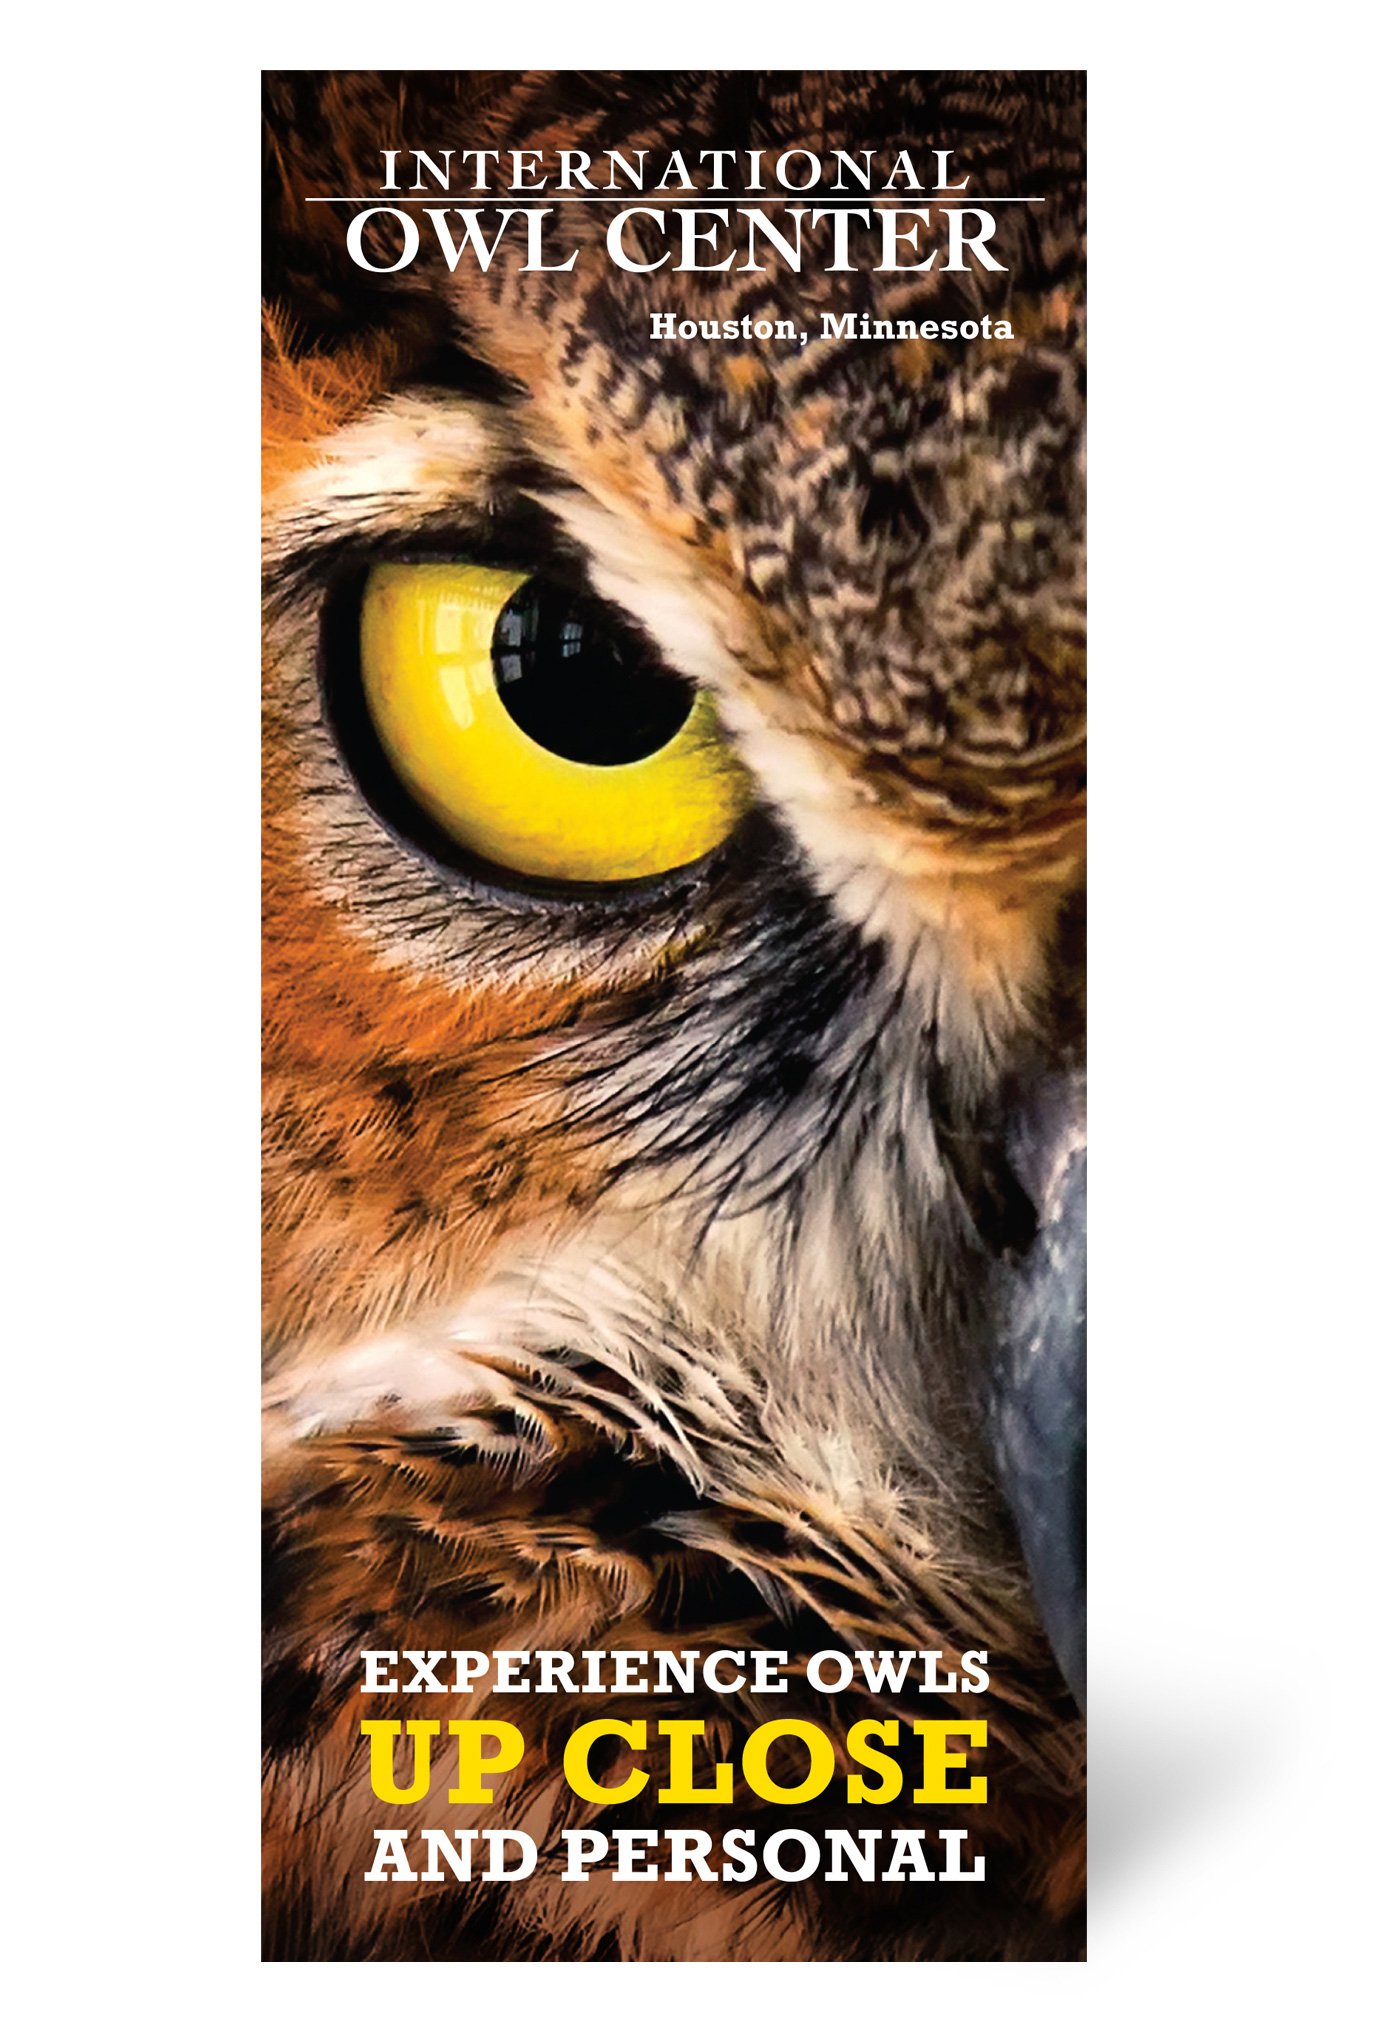 Color brochure for the International Owl Center with logo, closeup of resident owl face and experience owls up close headline